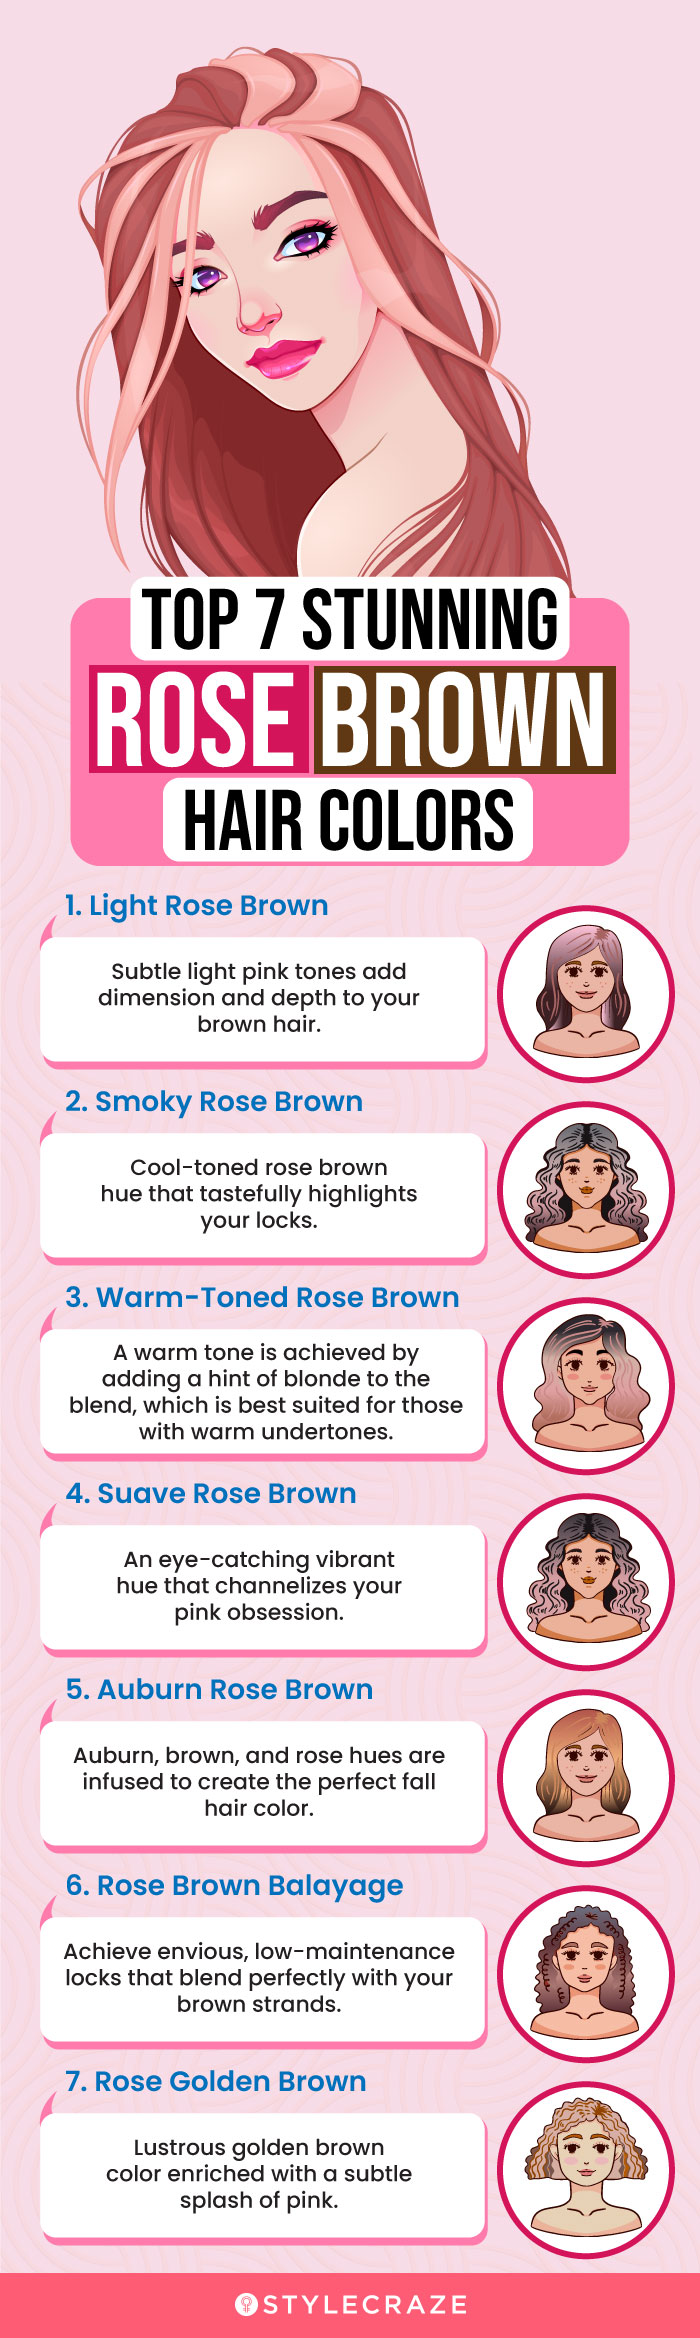 top 7 stunning rose brown hair colors (infographic)